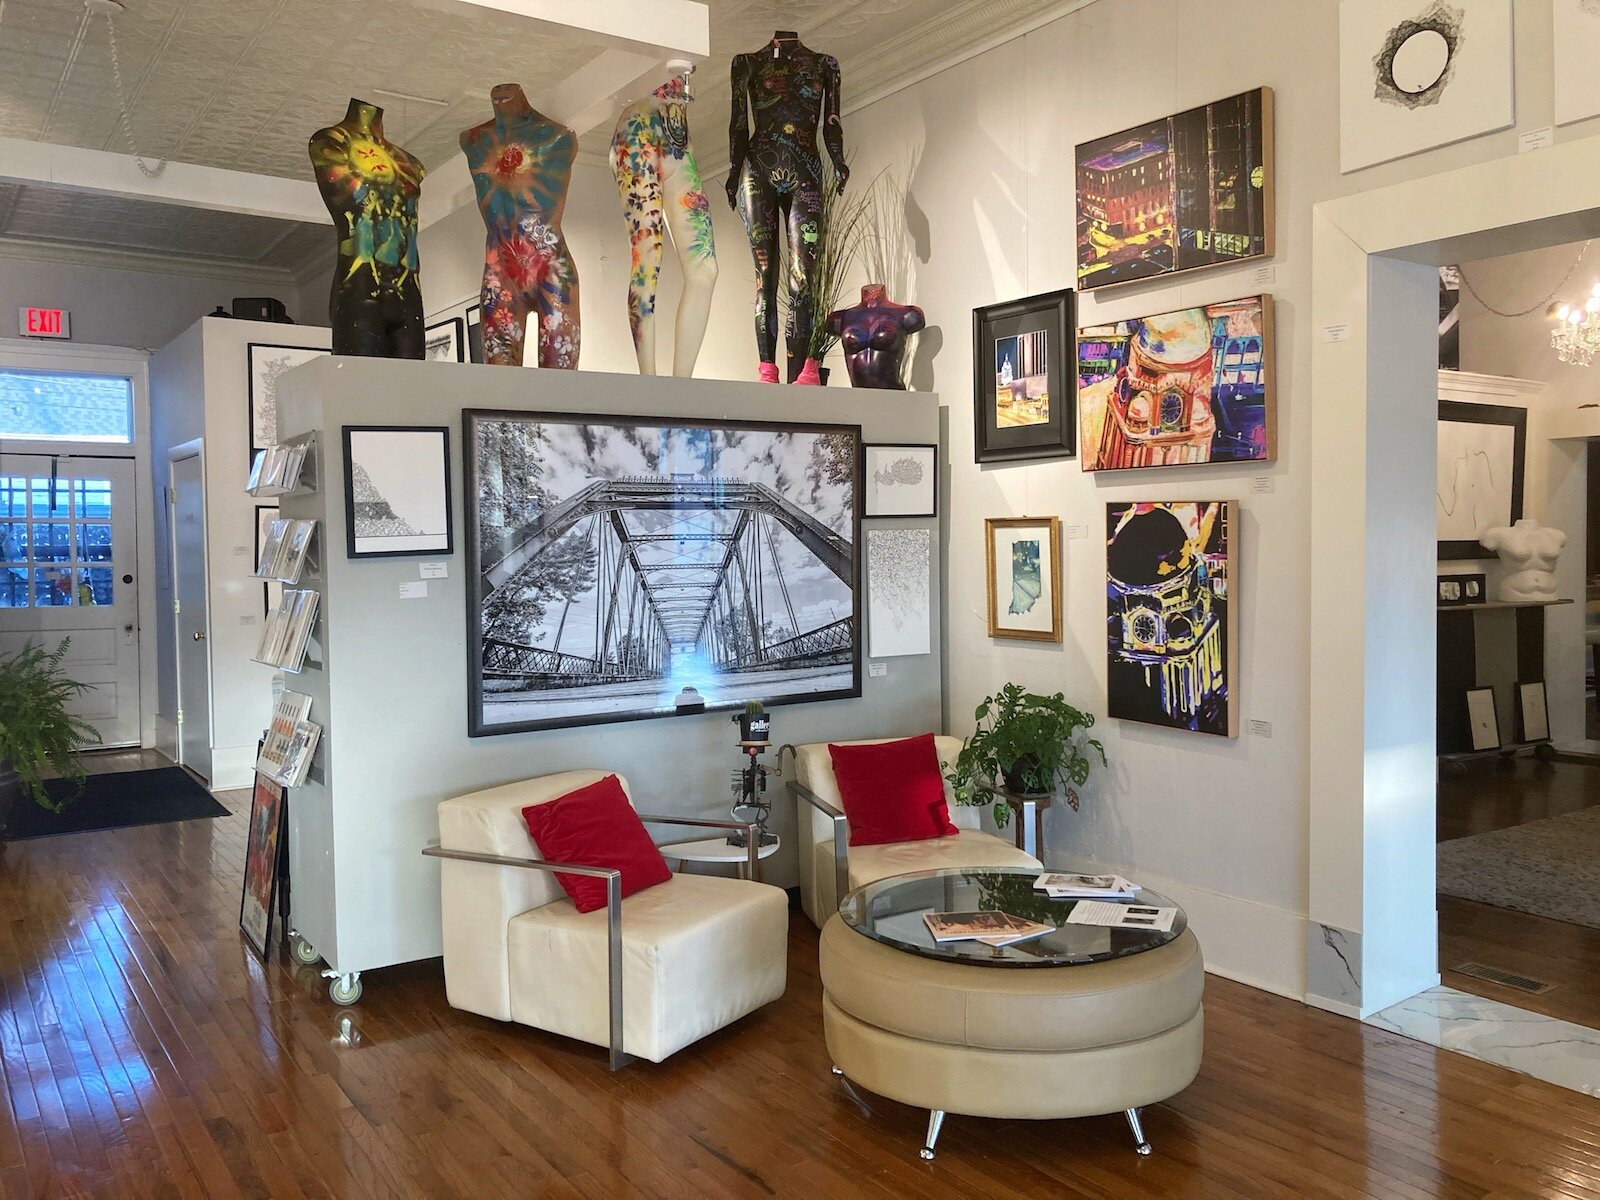 Gallery K is open from noon to 5 p.m. Saturdays and on special appointment.